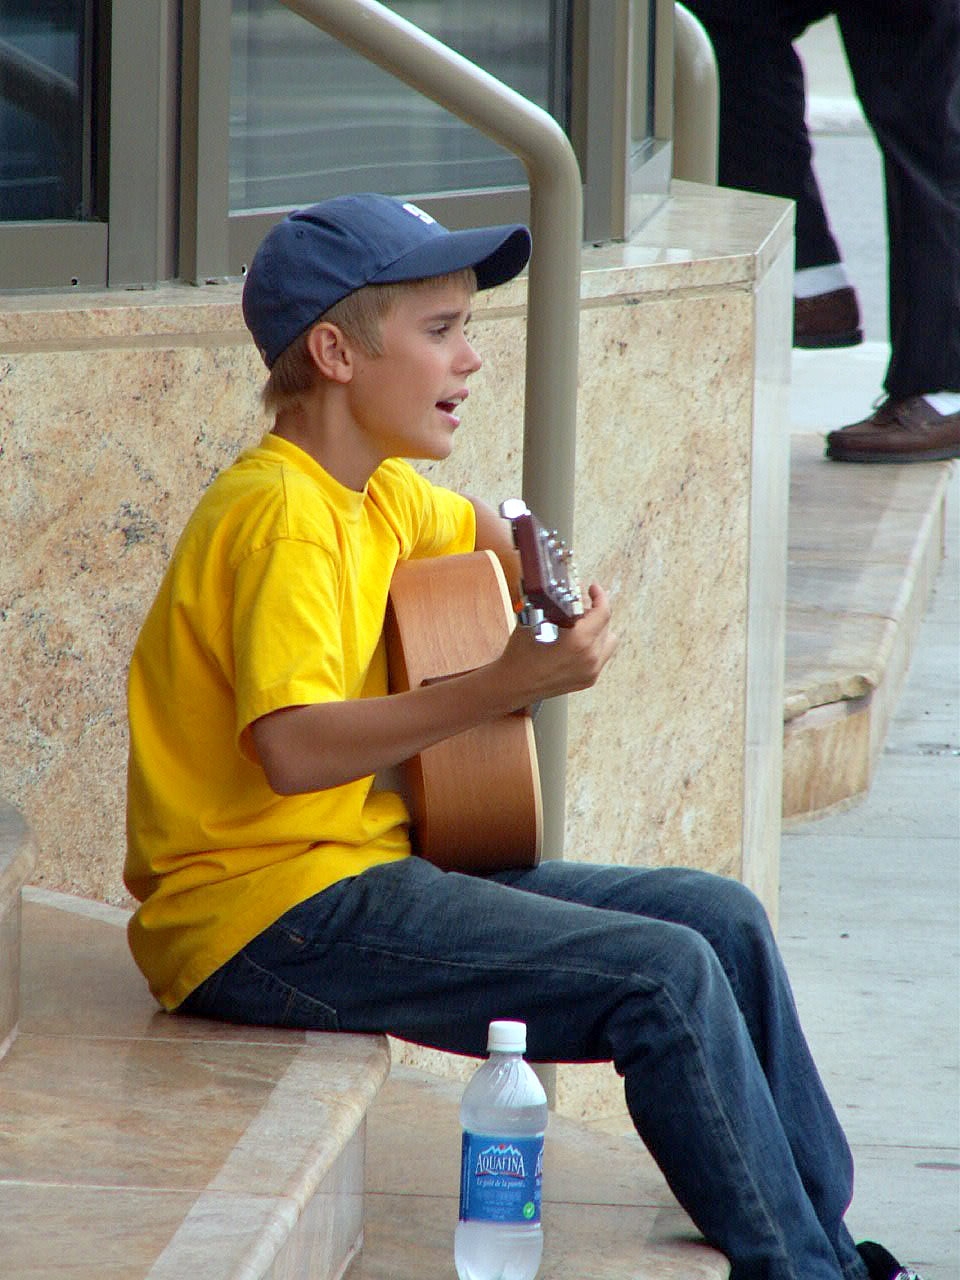 The boy performing on the street in Stratford, Canada, on August 20, 2007 | Source: Getty Images